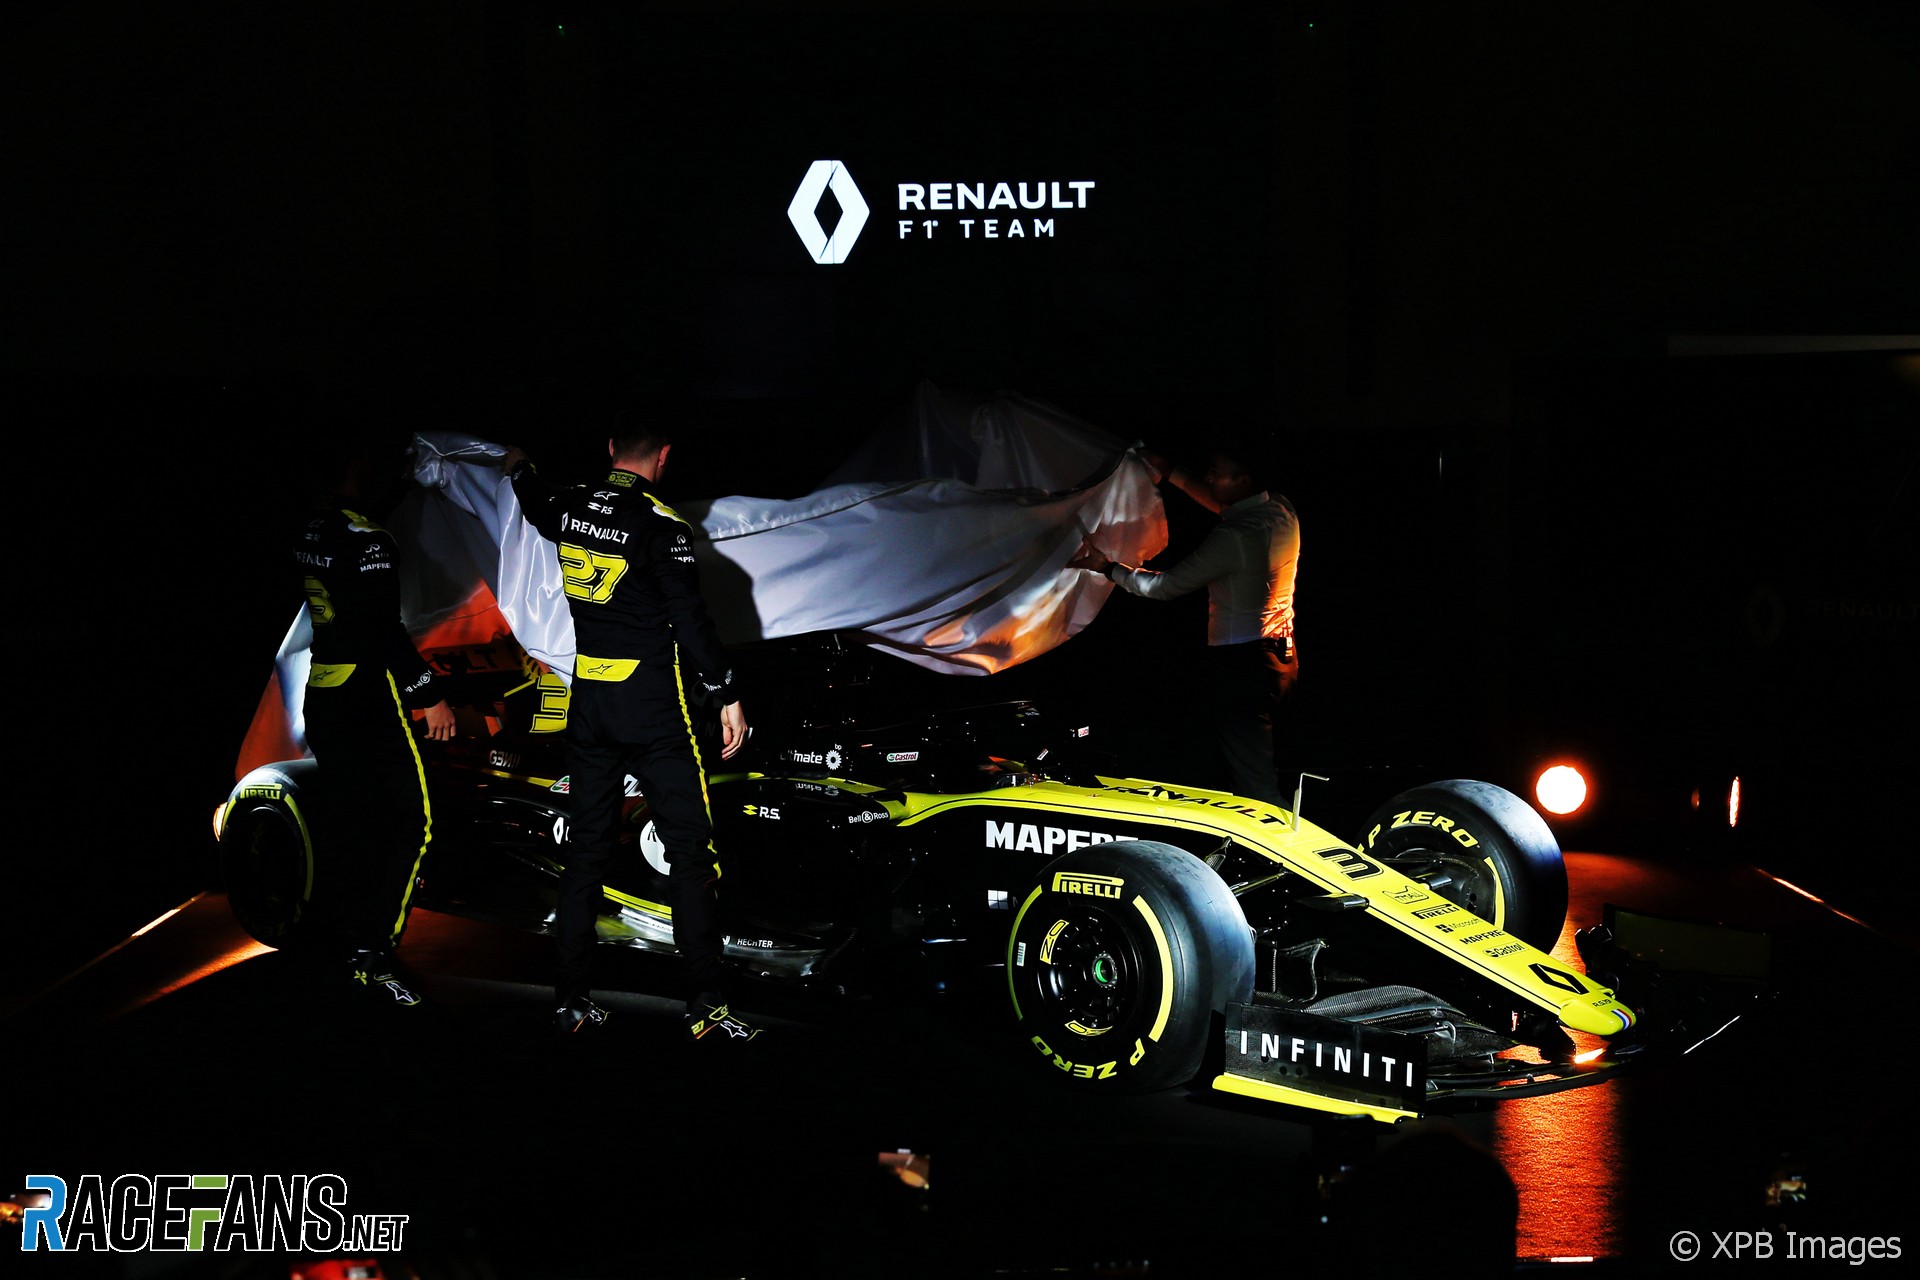 First pictures: Renault reveals its new livery for 2019